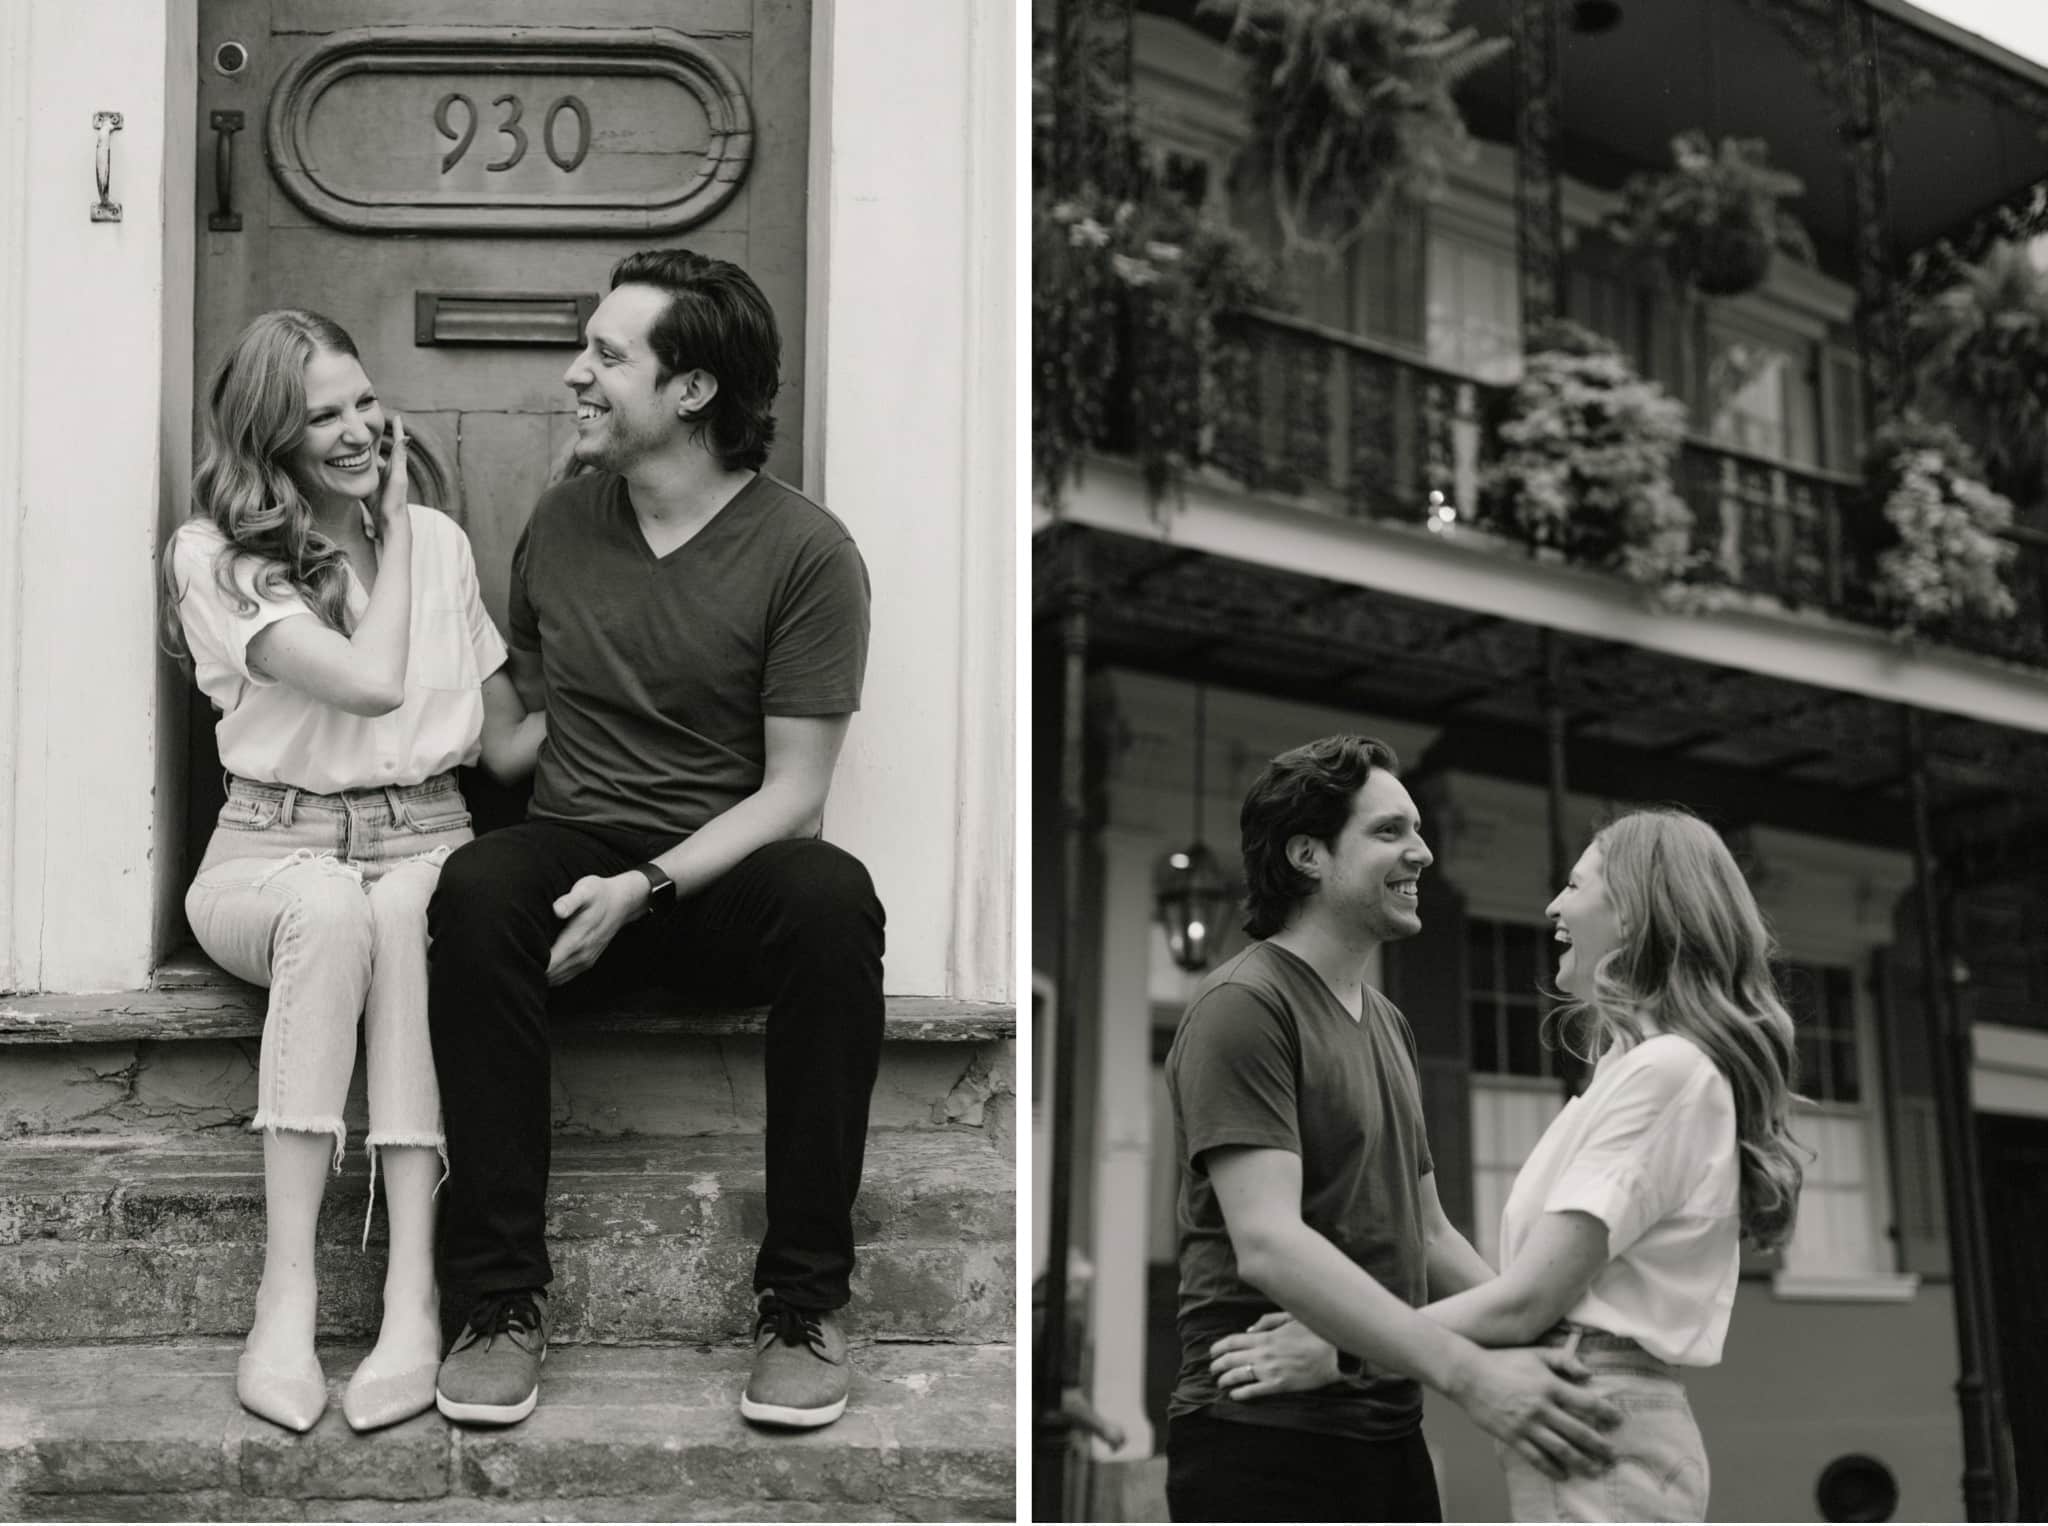 Cloudy French Quarter Engagement Session